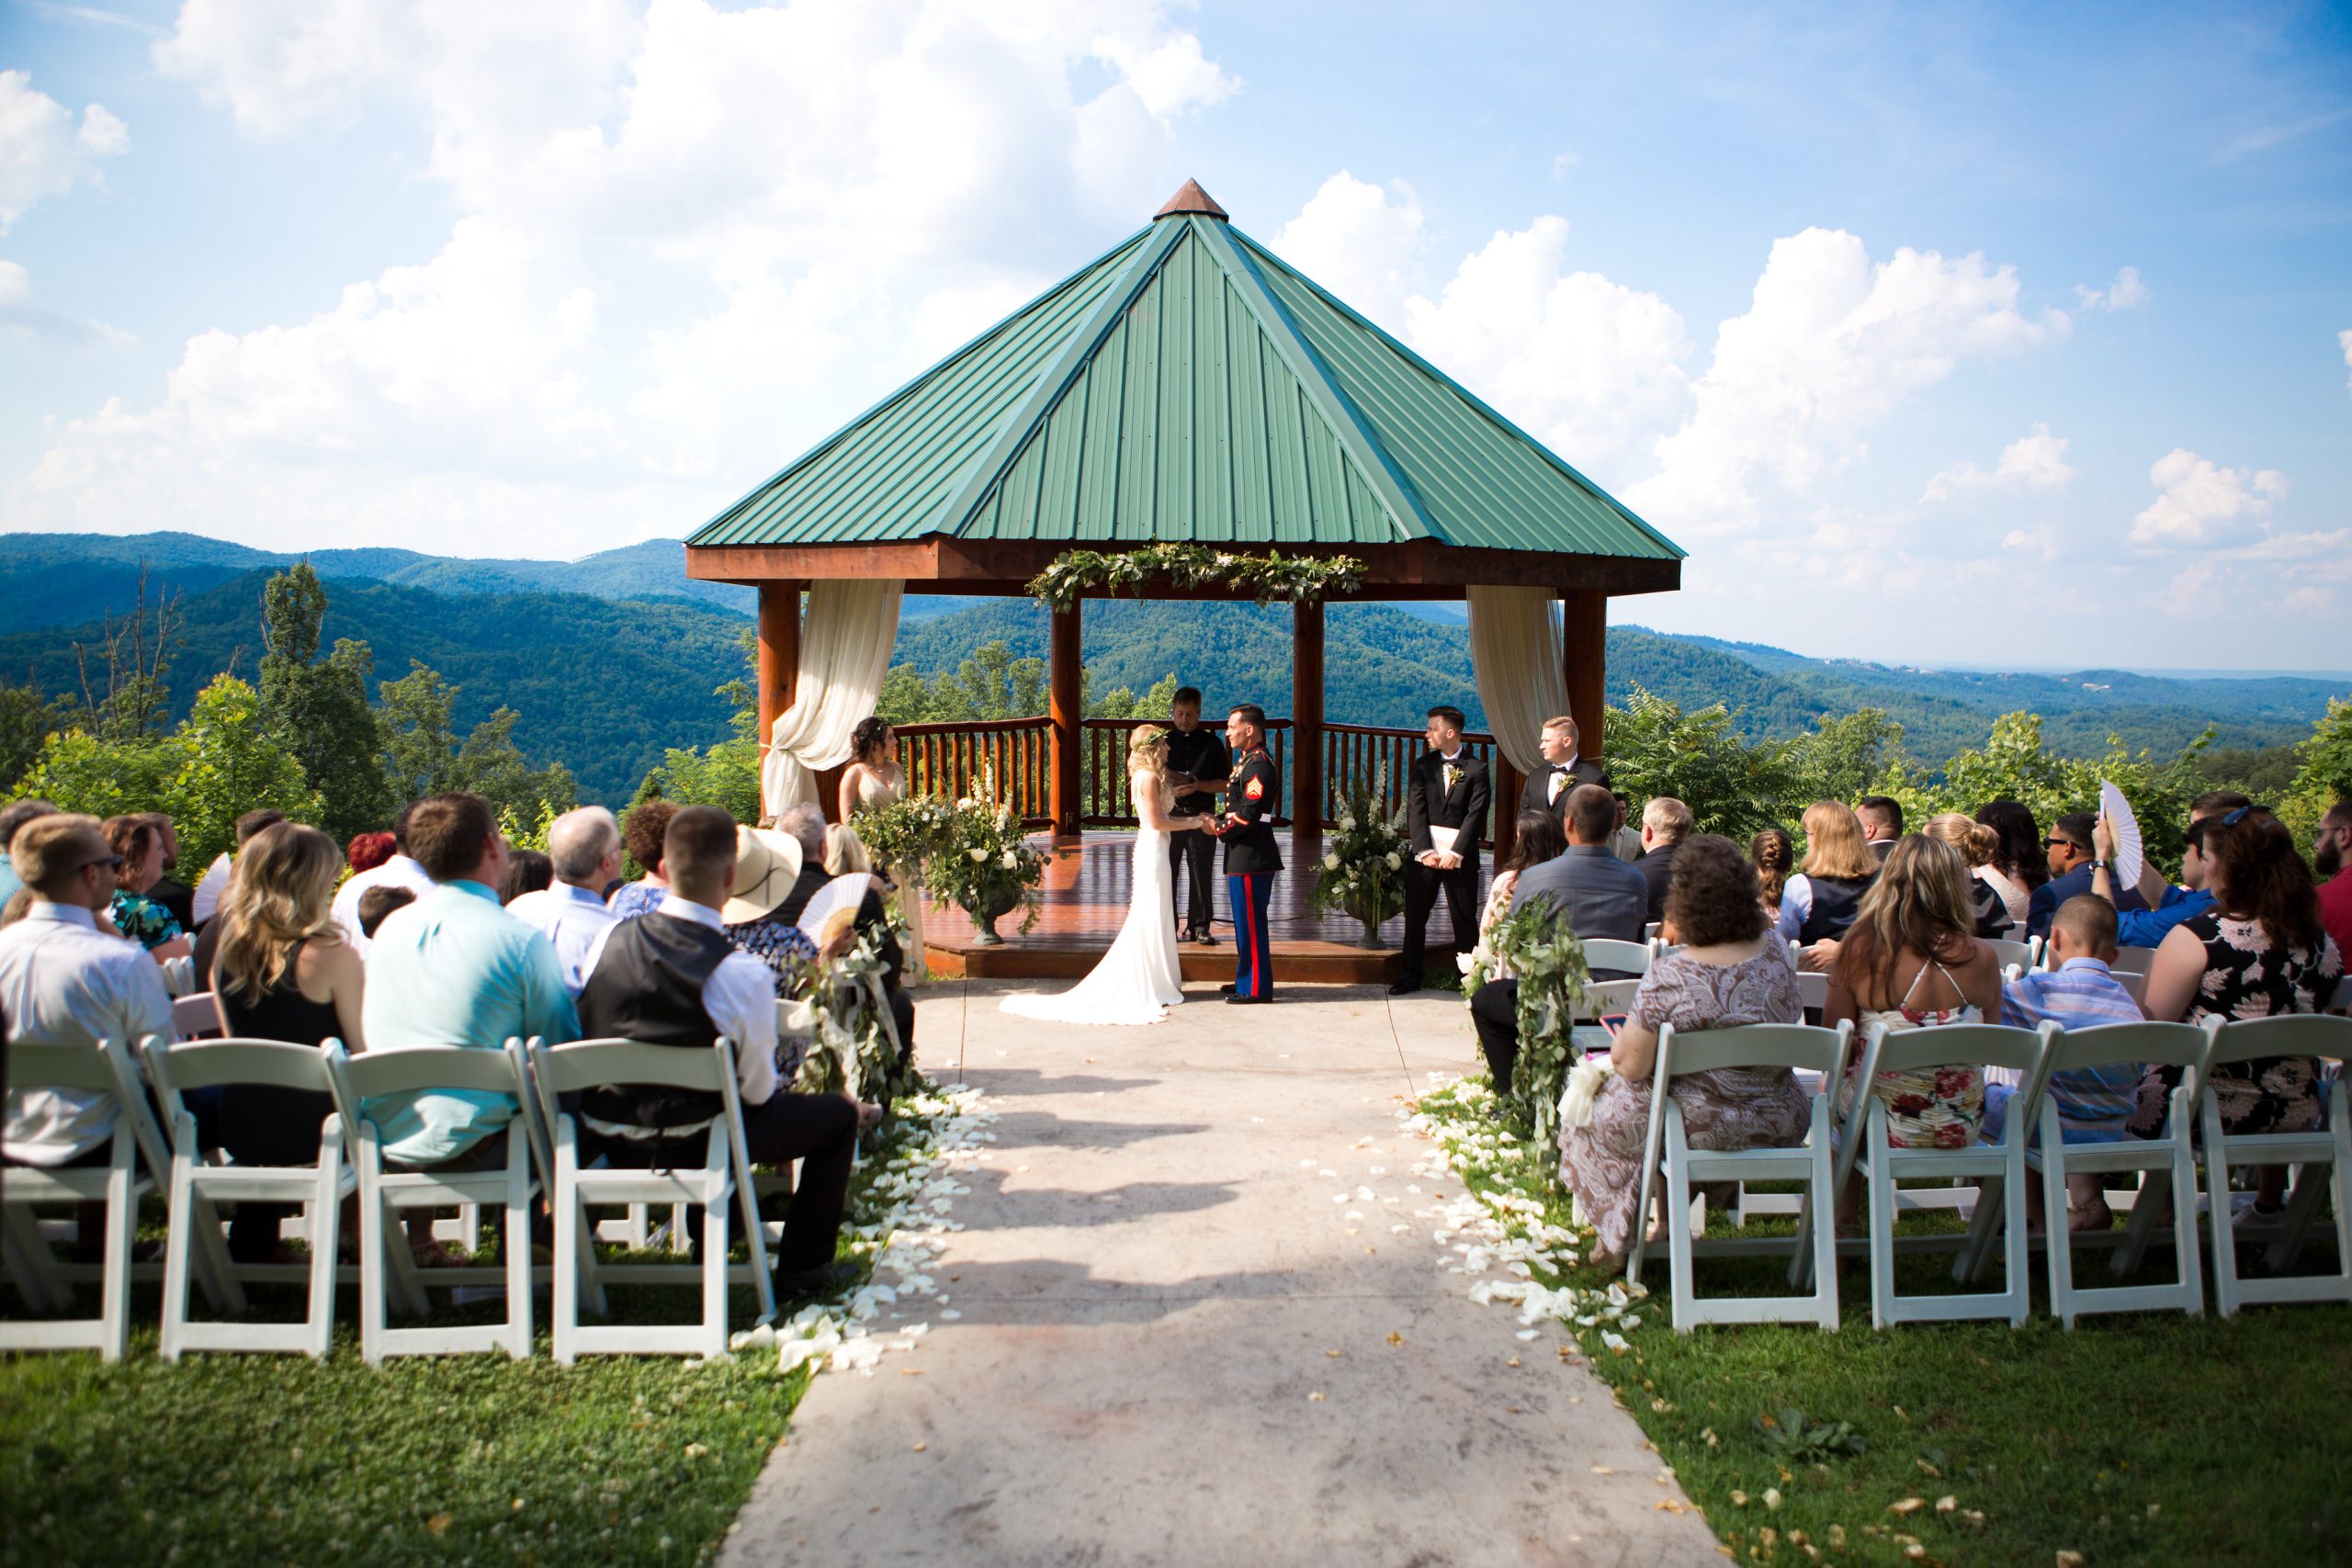 The Lodge at Brother’s Cove is the ideal place to host a Smoky Mountain wedding. Located on the 450-acre Brother’s Cove Resort in Pigeon Forge, TN, the Lodge is perfectly situated amidst the stunning natural beauty the Smokies are known for.